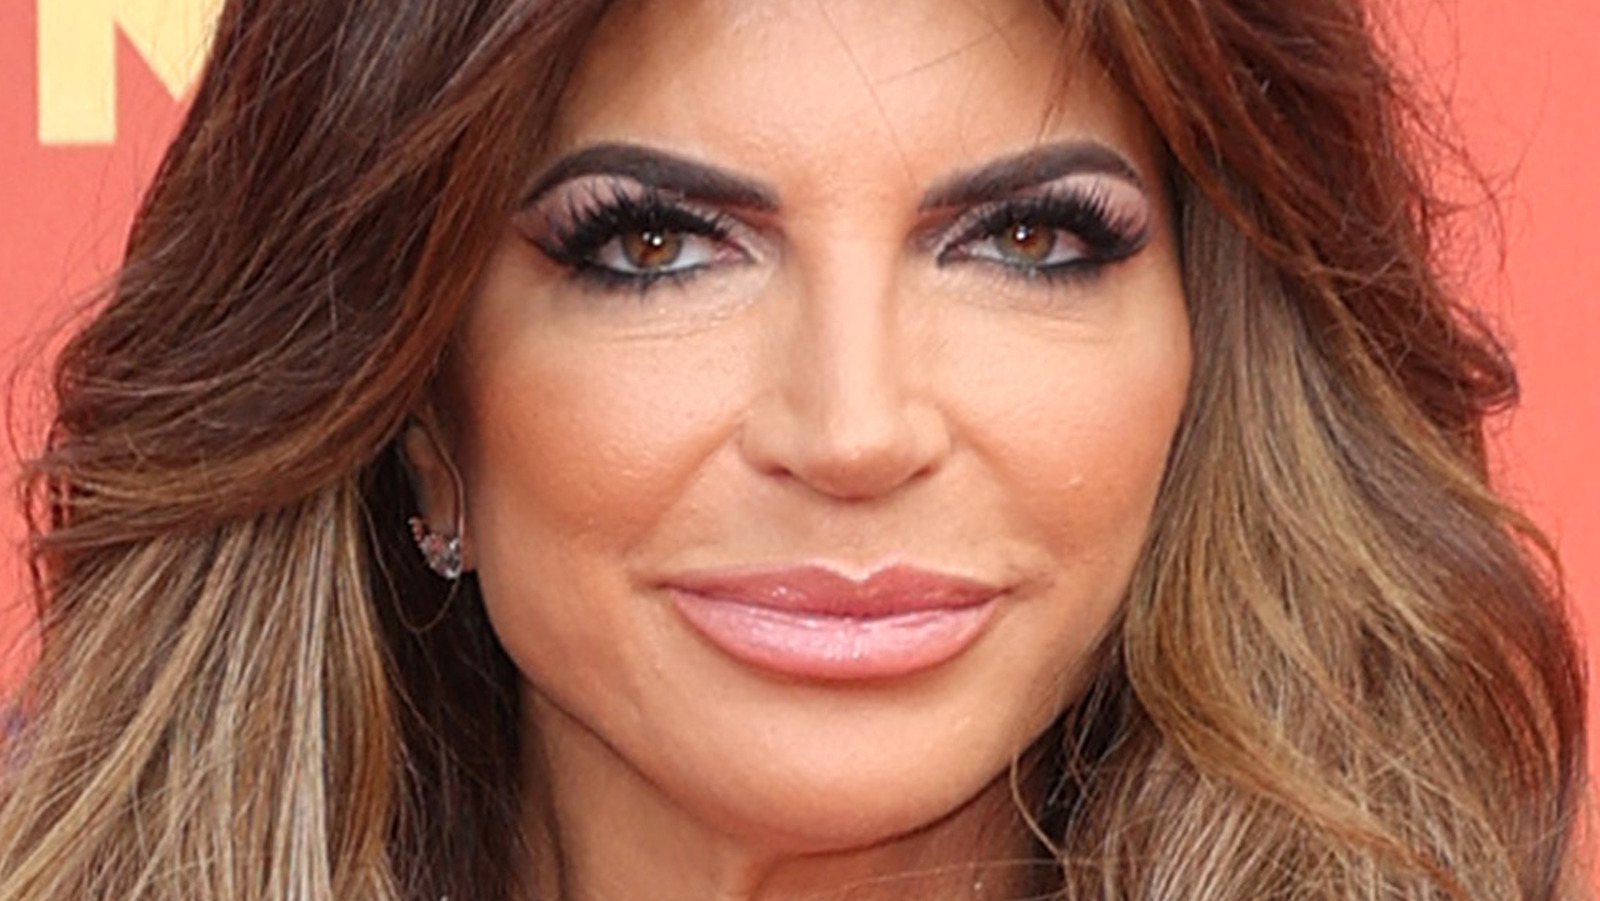 Two Important Guests Are Reportedly Skipping Teresa Giudice’s Wedding